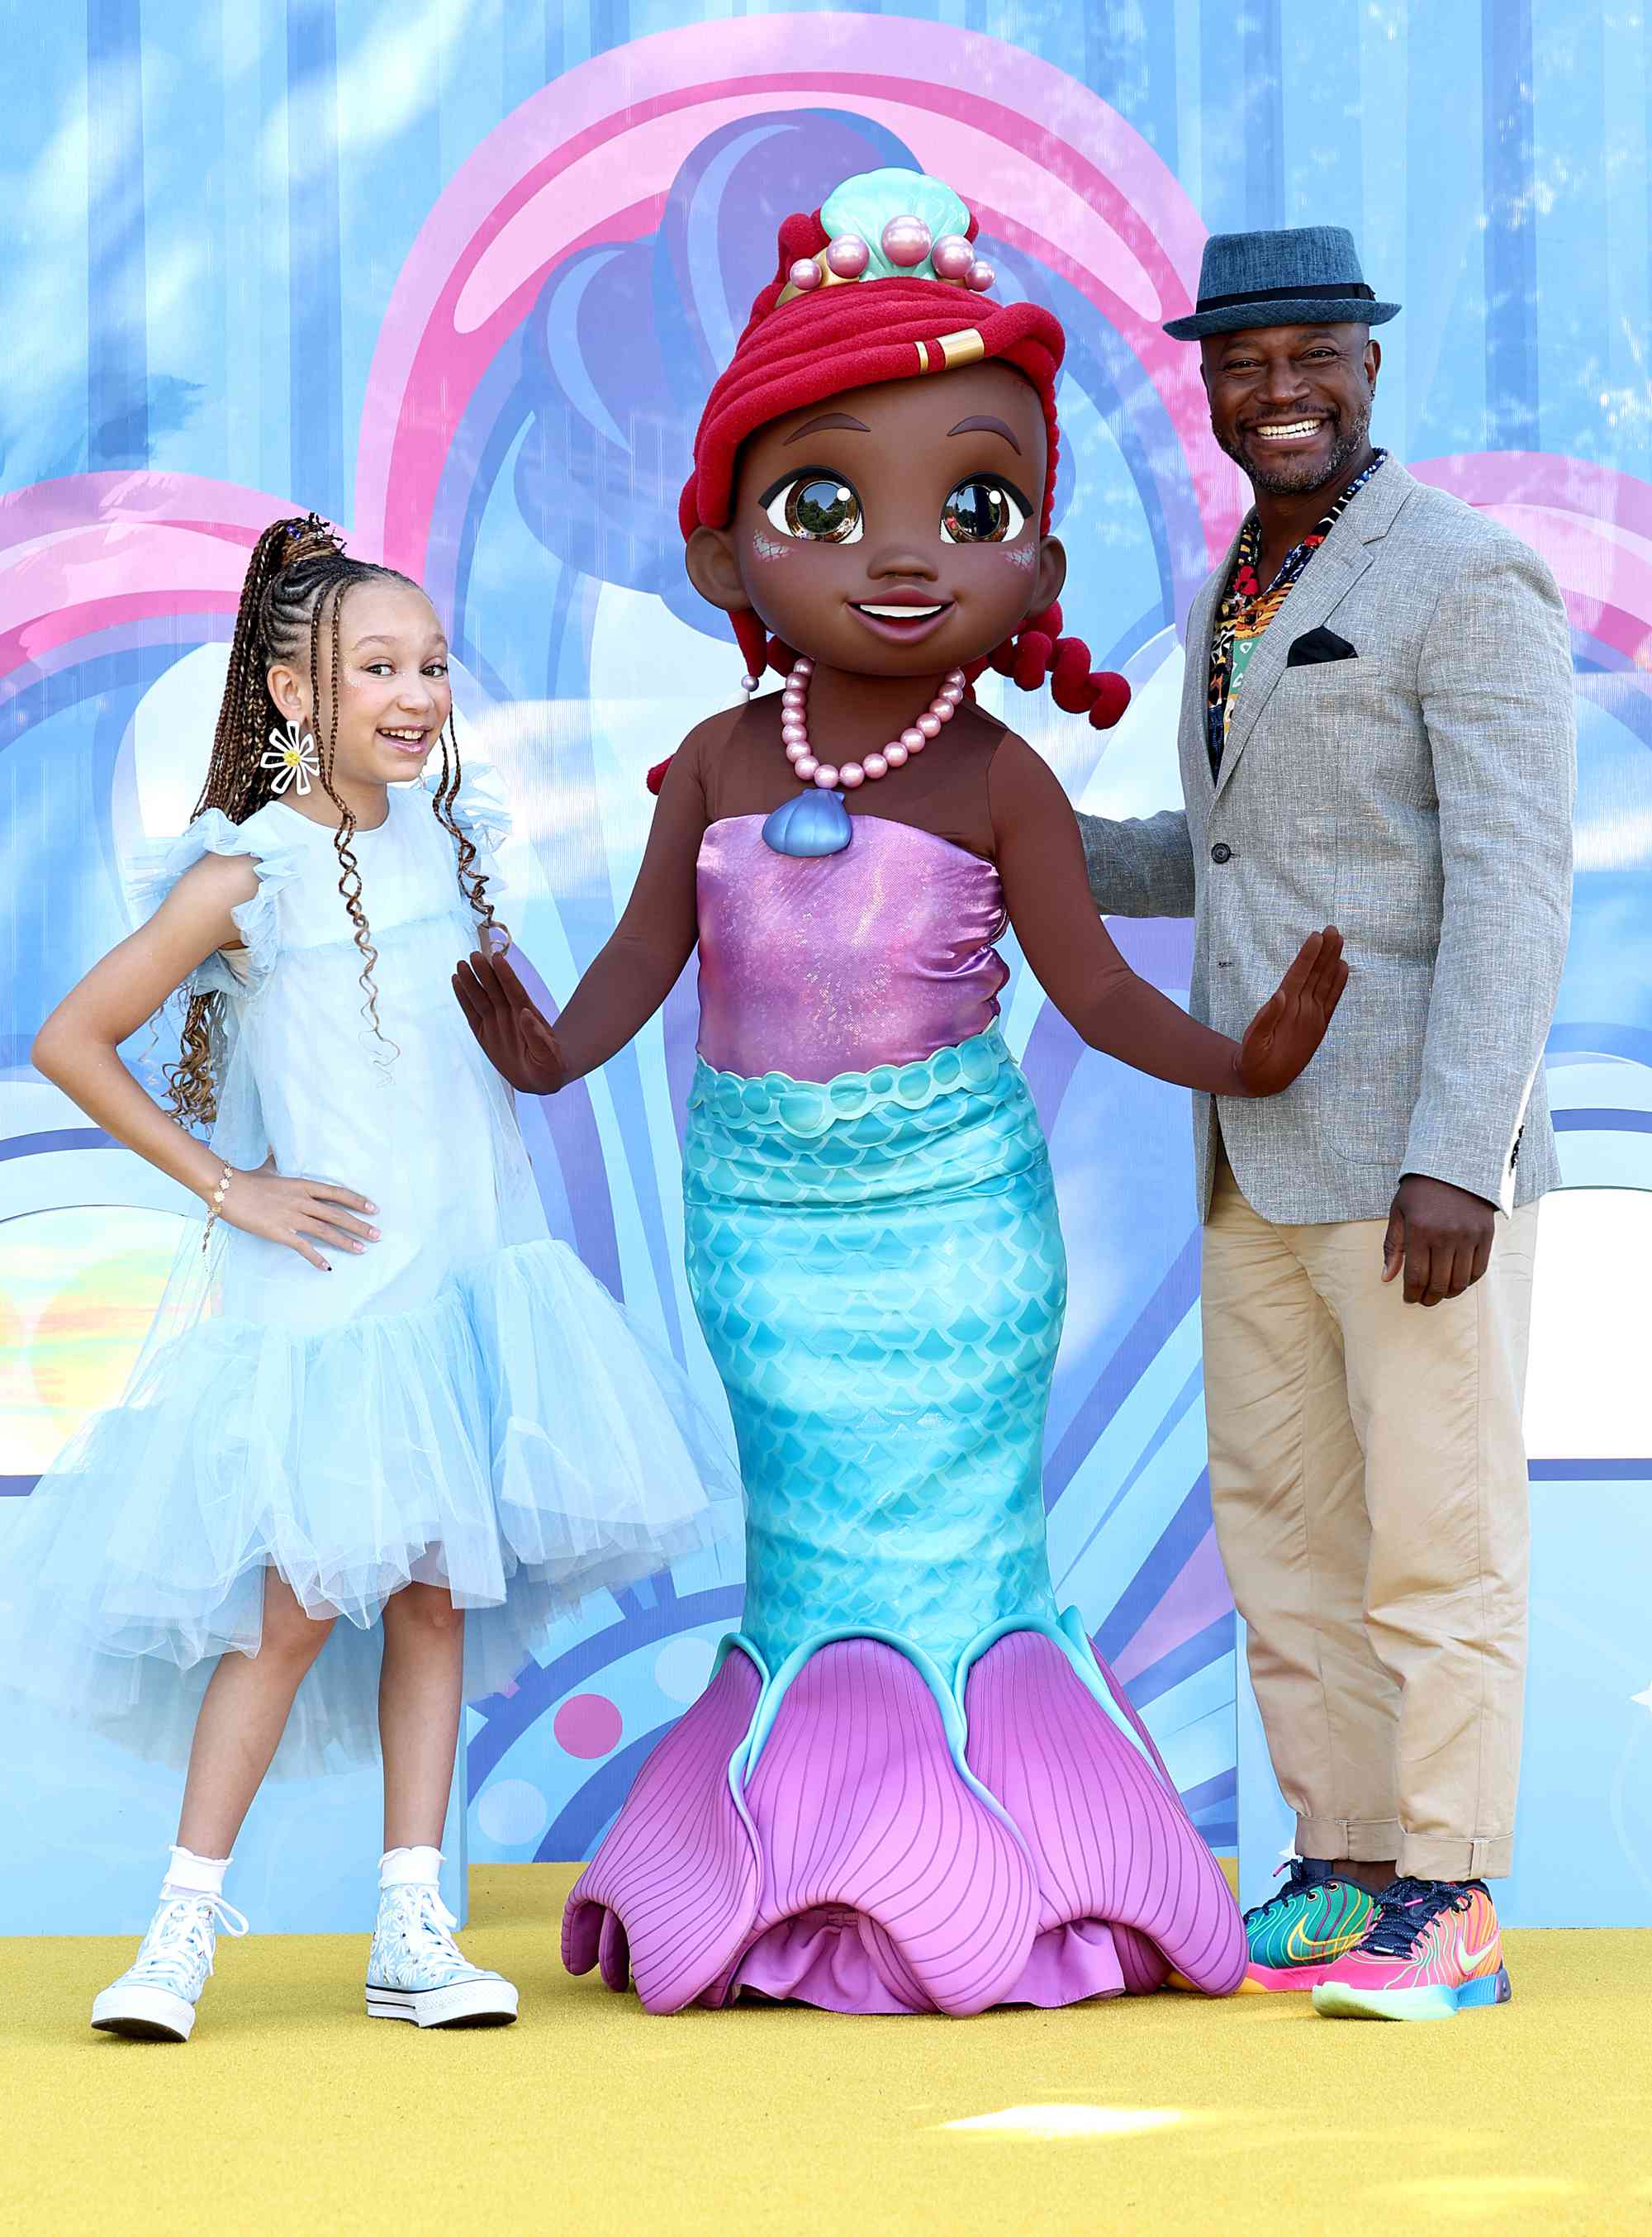 Mykal-Michelle Harris and Taye Diggs pose with Ariel at "Disney Jr.'s Ariel" Premiere Celebration at Battery Park on June 28, 2024 in New York City. 